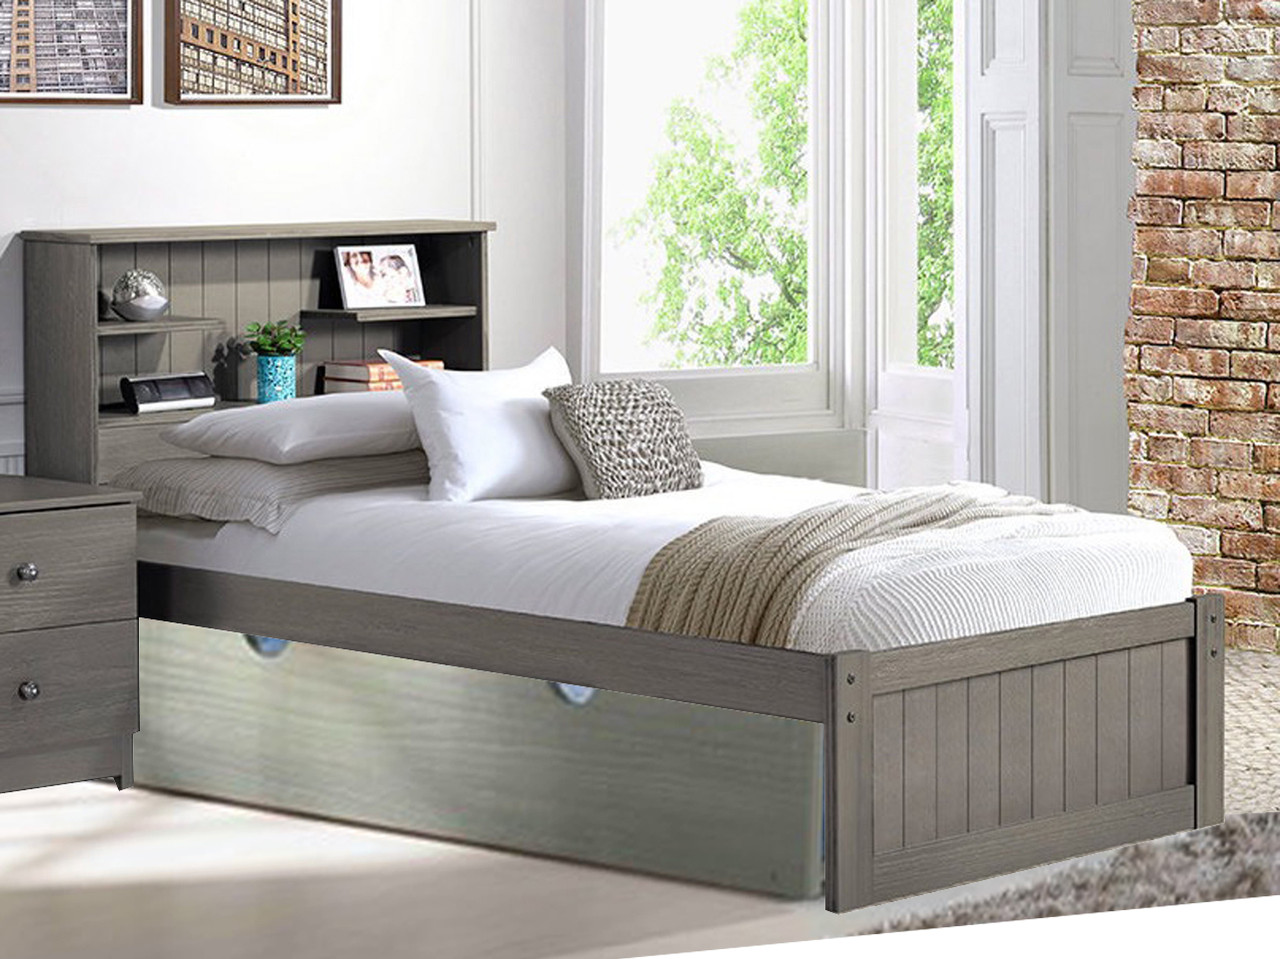 Rustic Pine Bookcase Platform Bed w/Trundle, Twin XL - Gray Brushed Finish